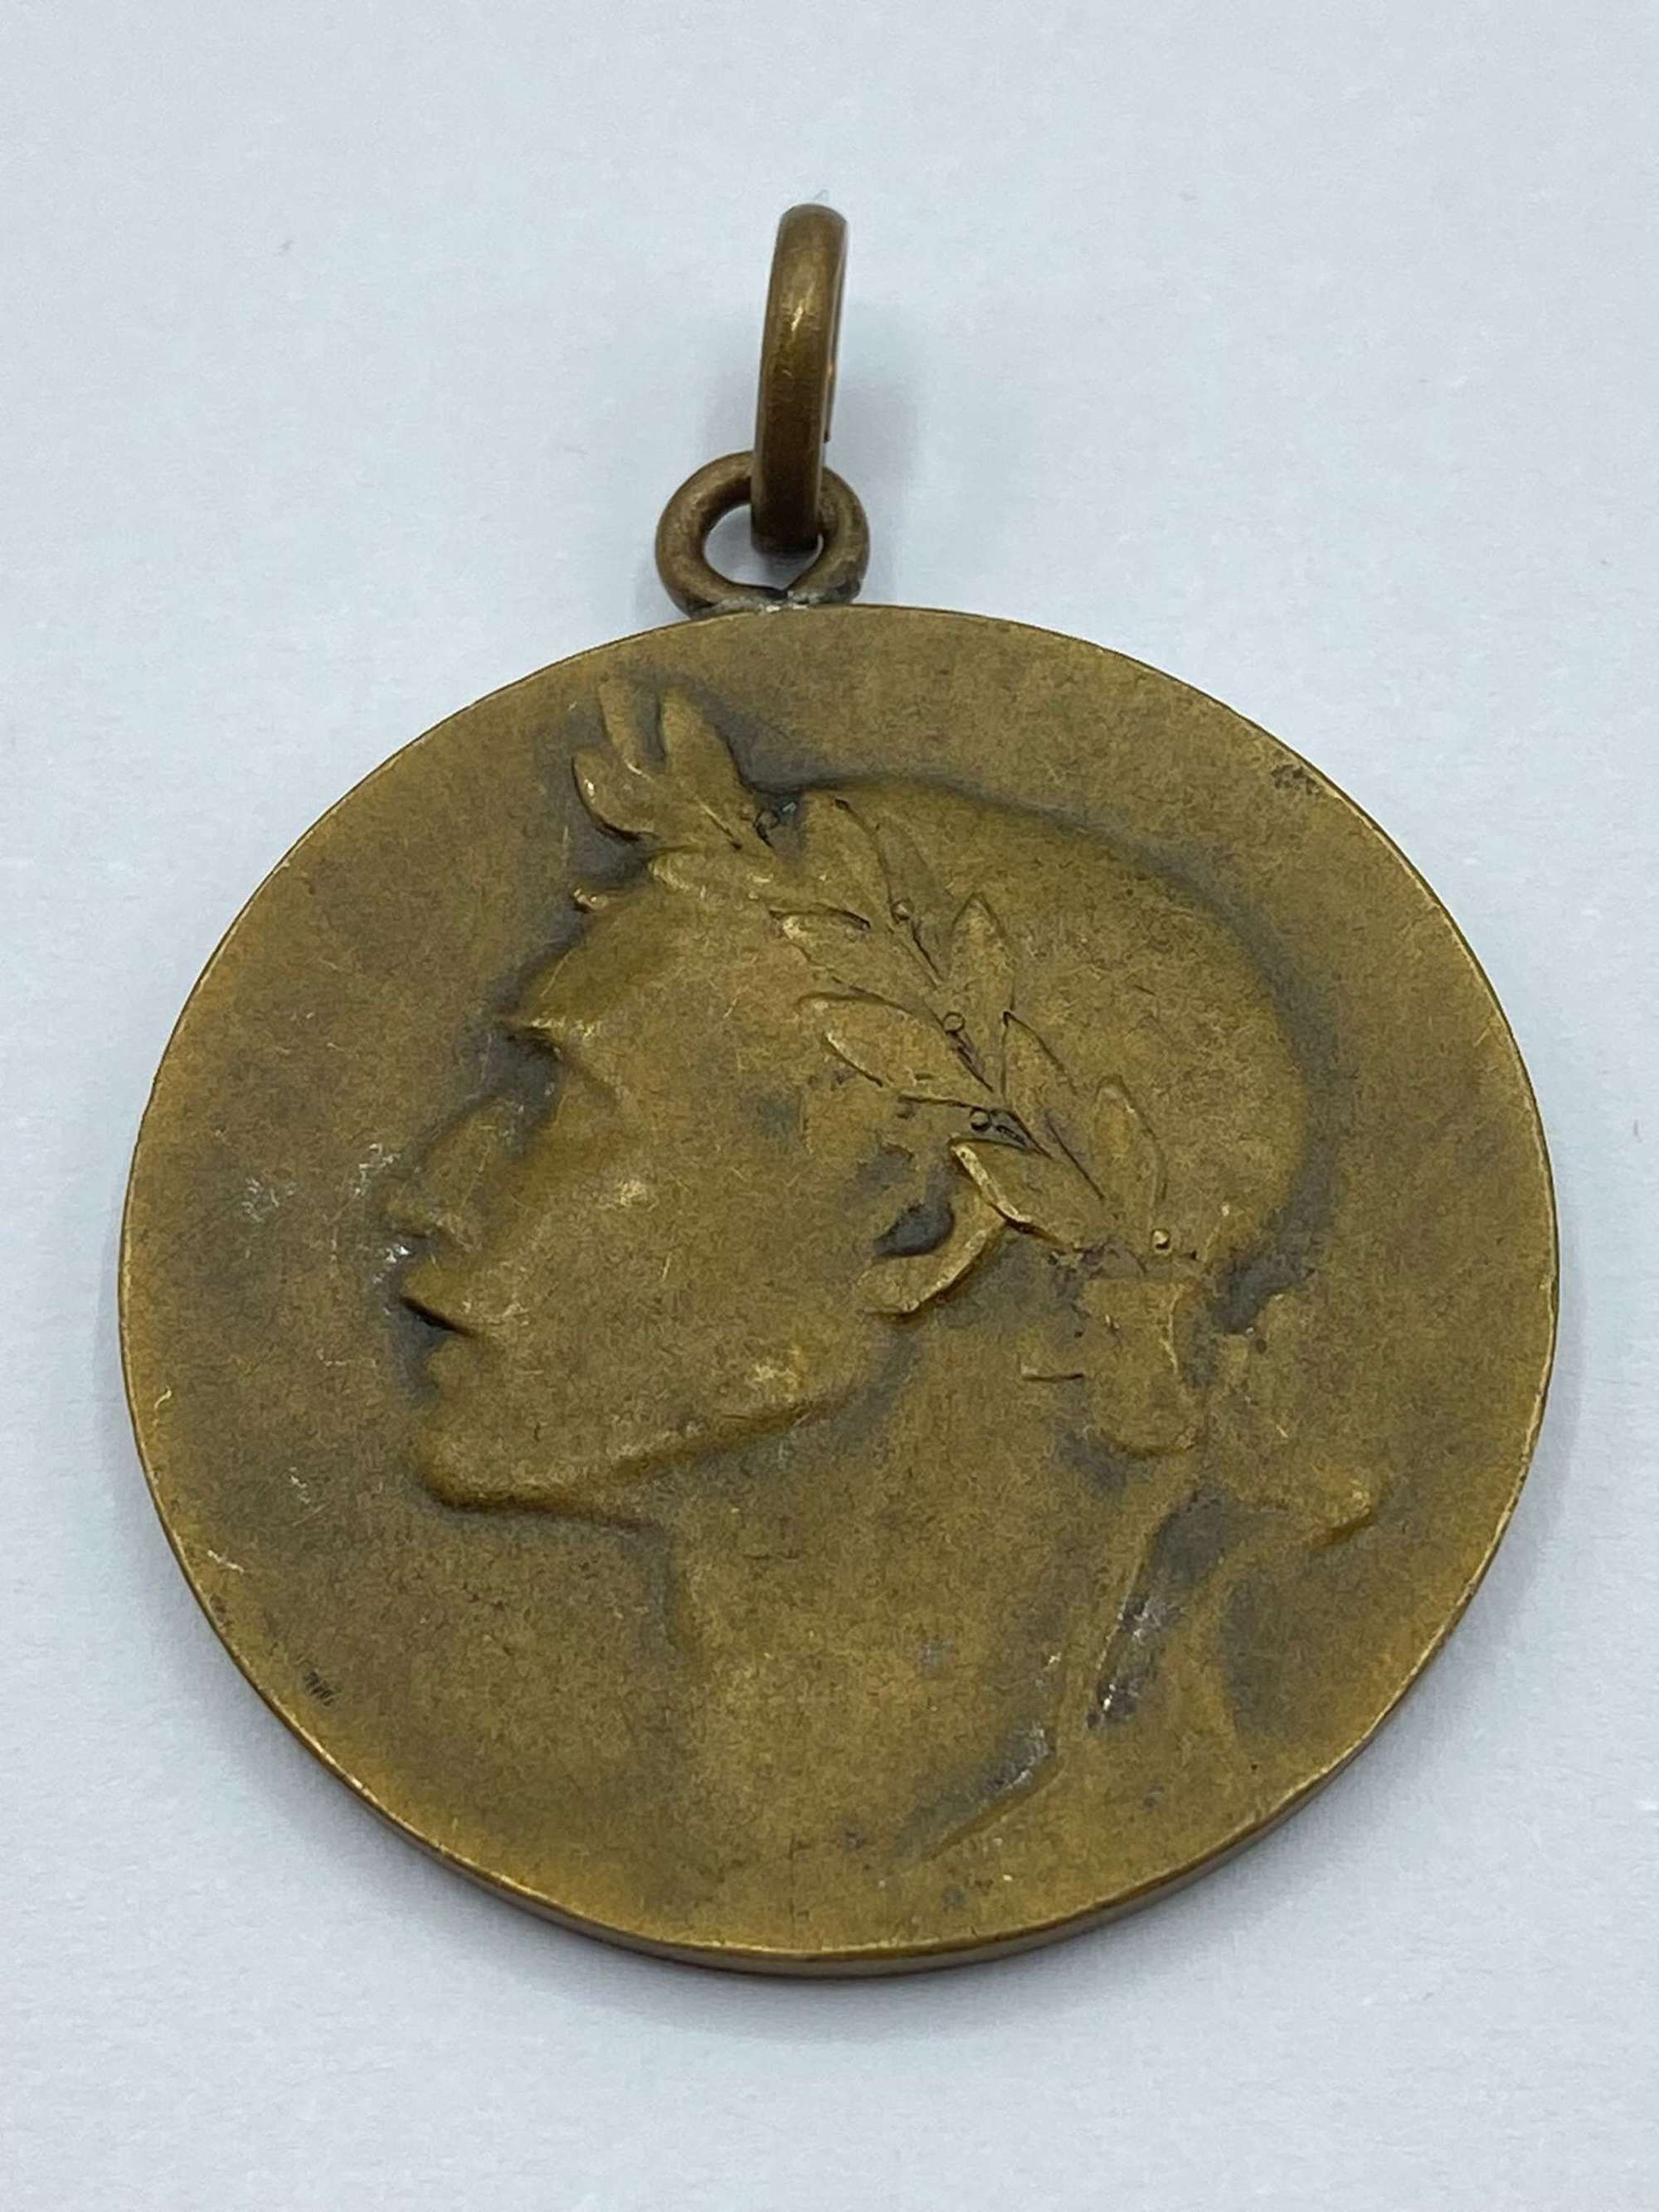 Post WW1 French Kayaking Whitewater Ranking Competition 1922 Medal